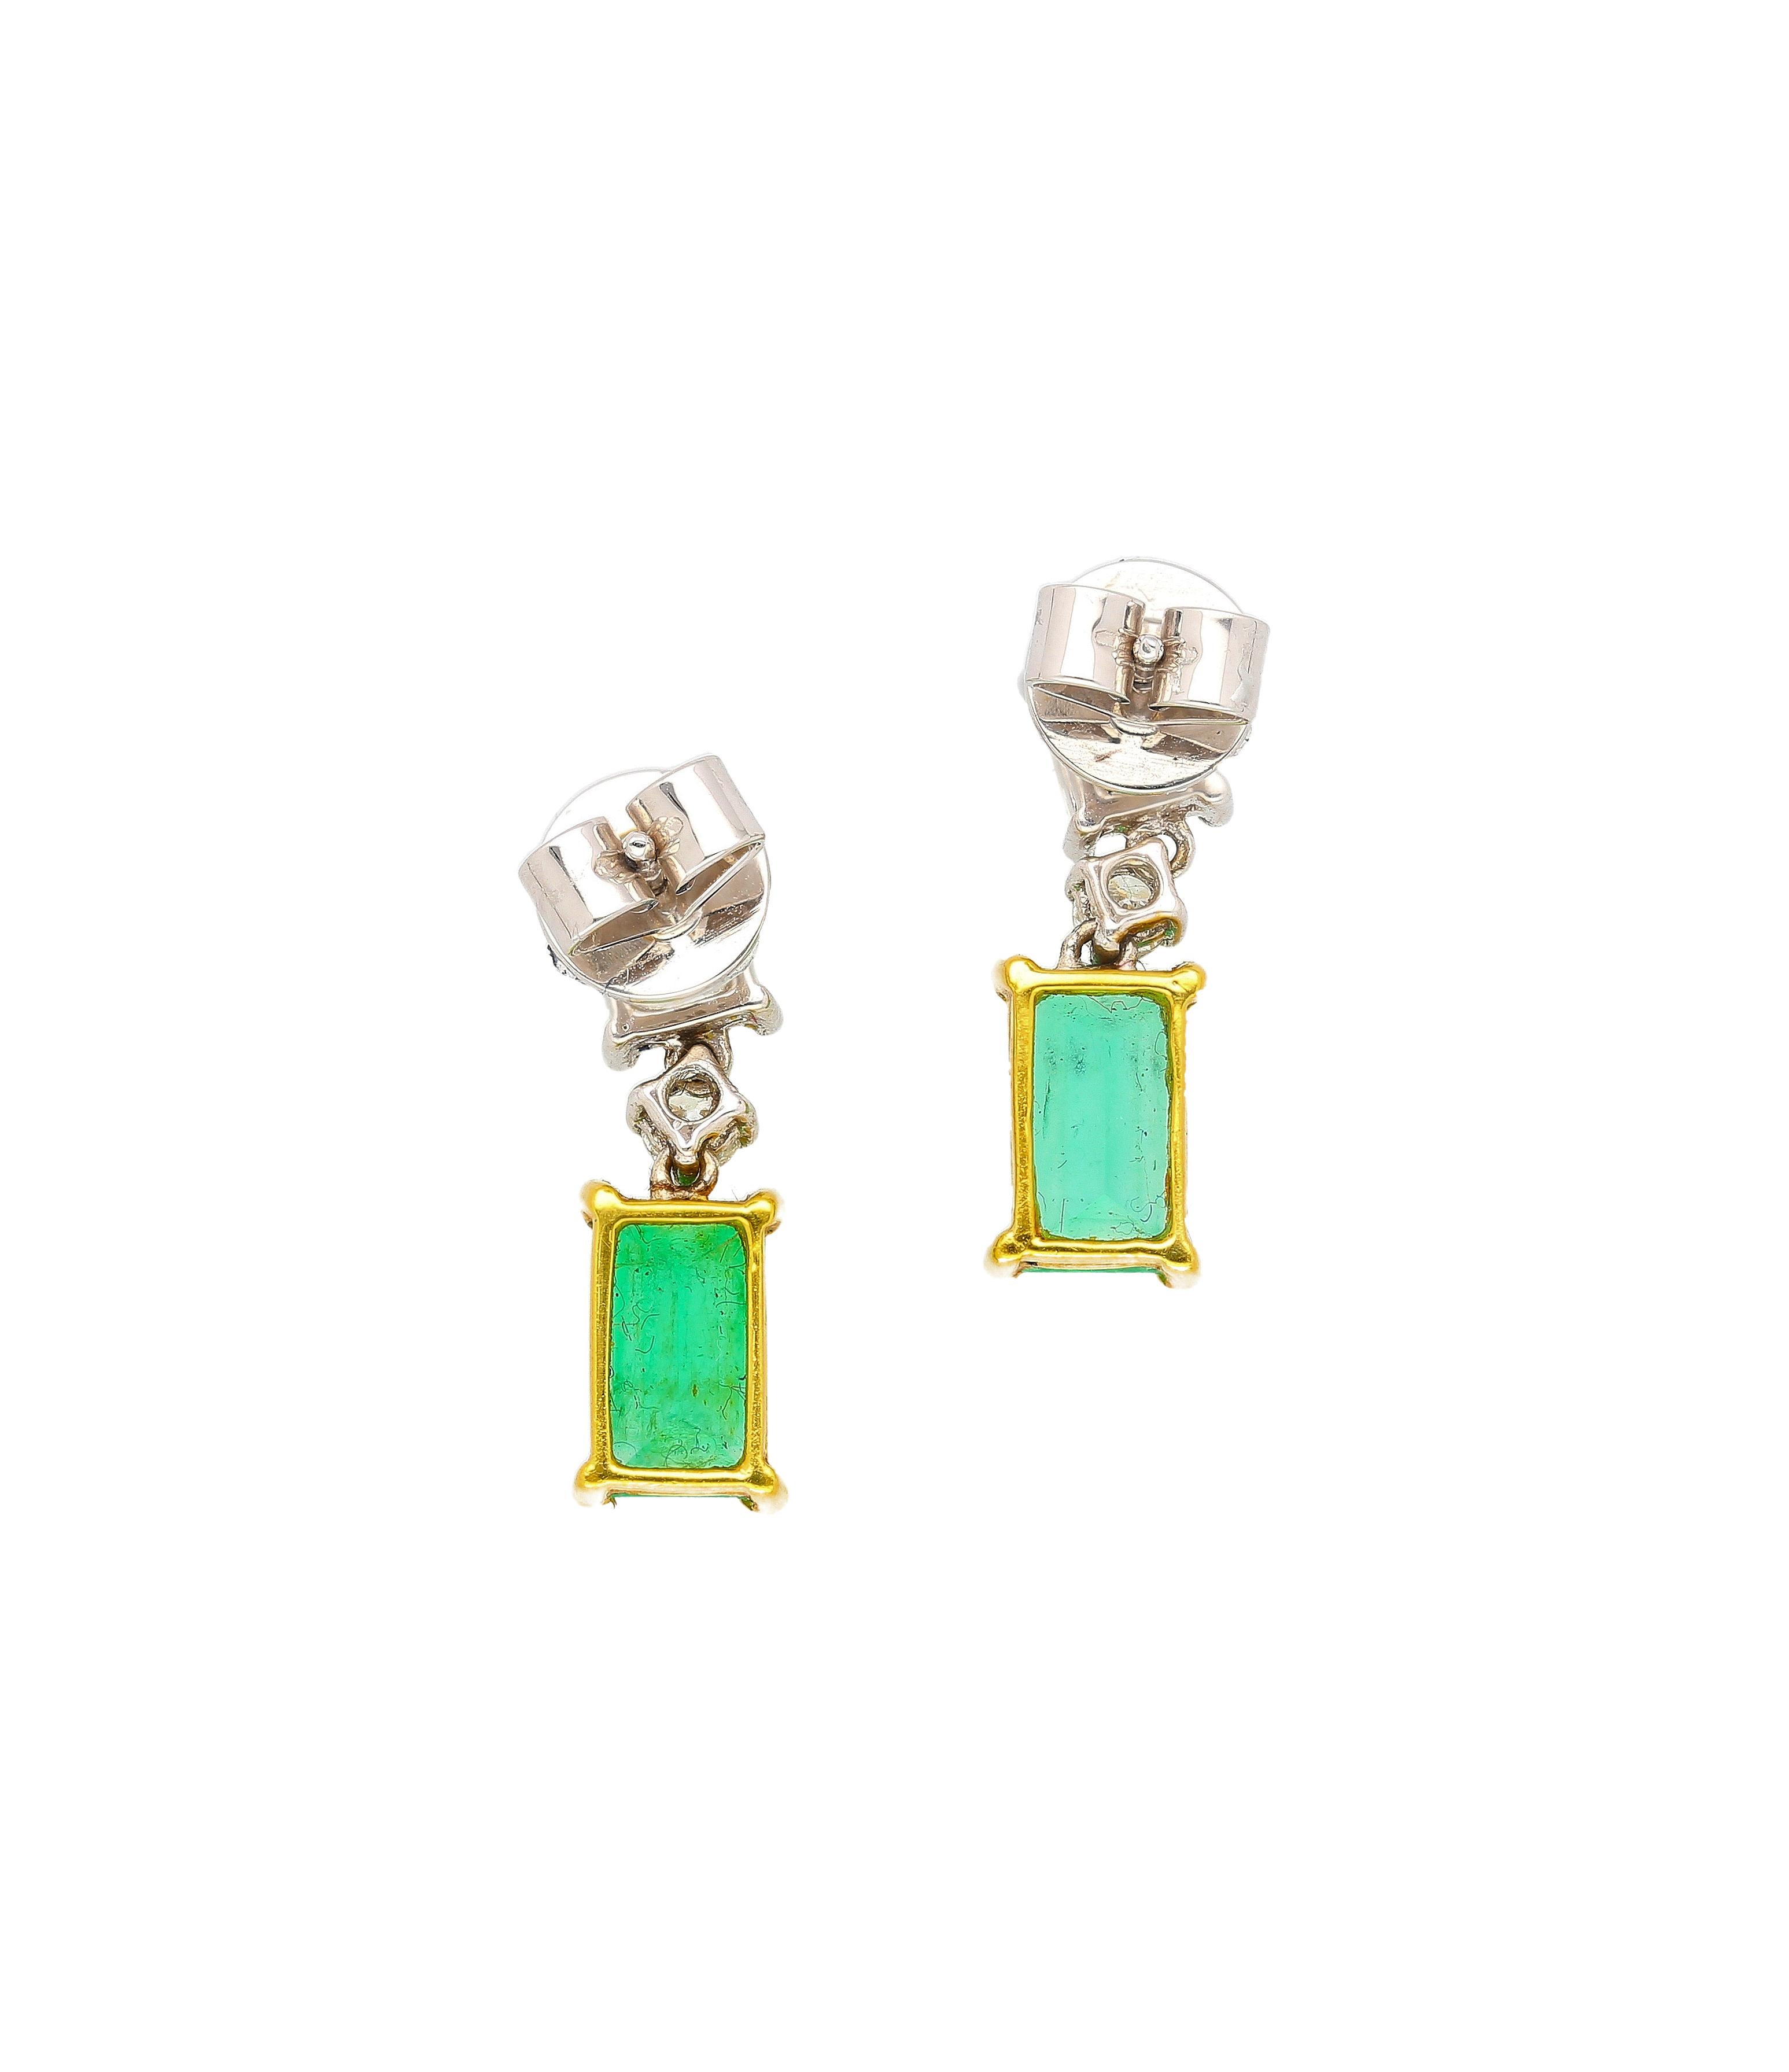 18k white and yellow gold dangle drop earrings. Centering 2 elongated emerald cut natural emeralds of 2.67 carats total. Complemented by 2 princess cut diamond tops mounted level to the closure that set directly on the earlobe.

These drop earrings